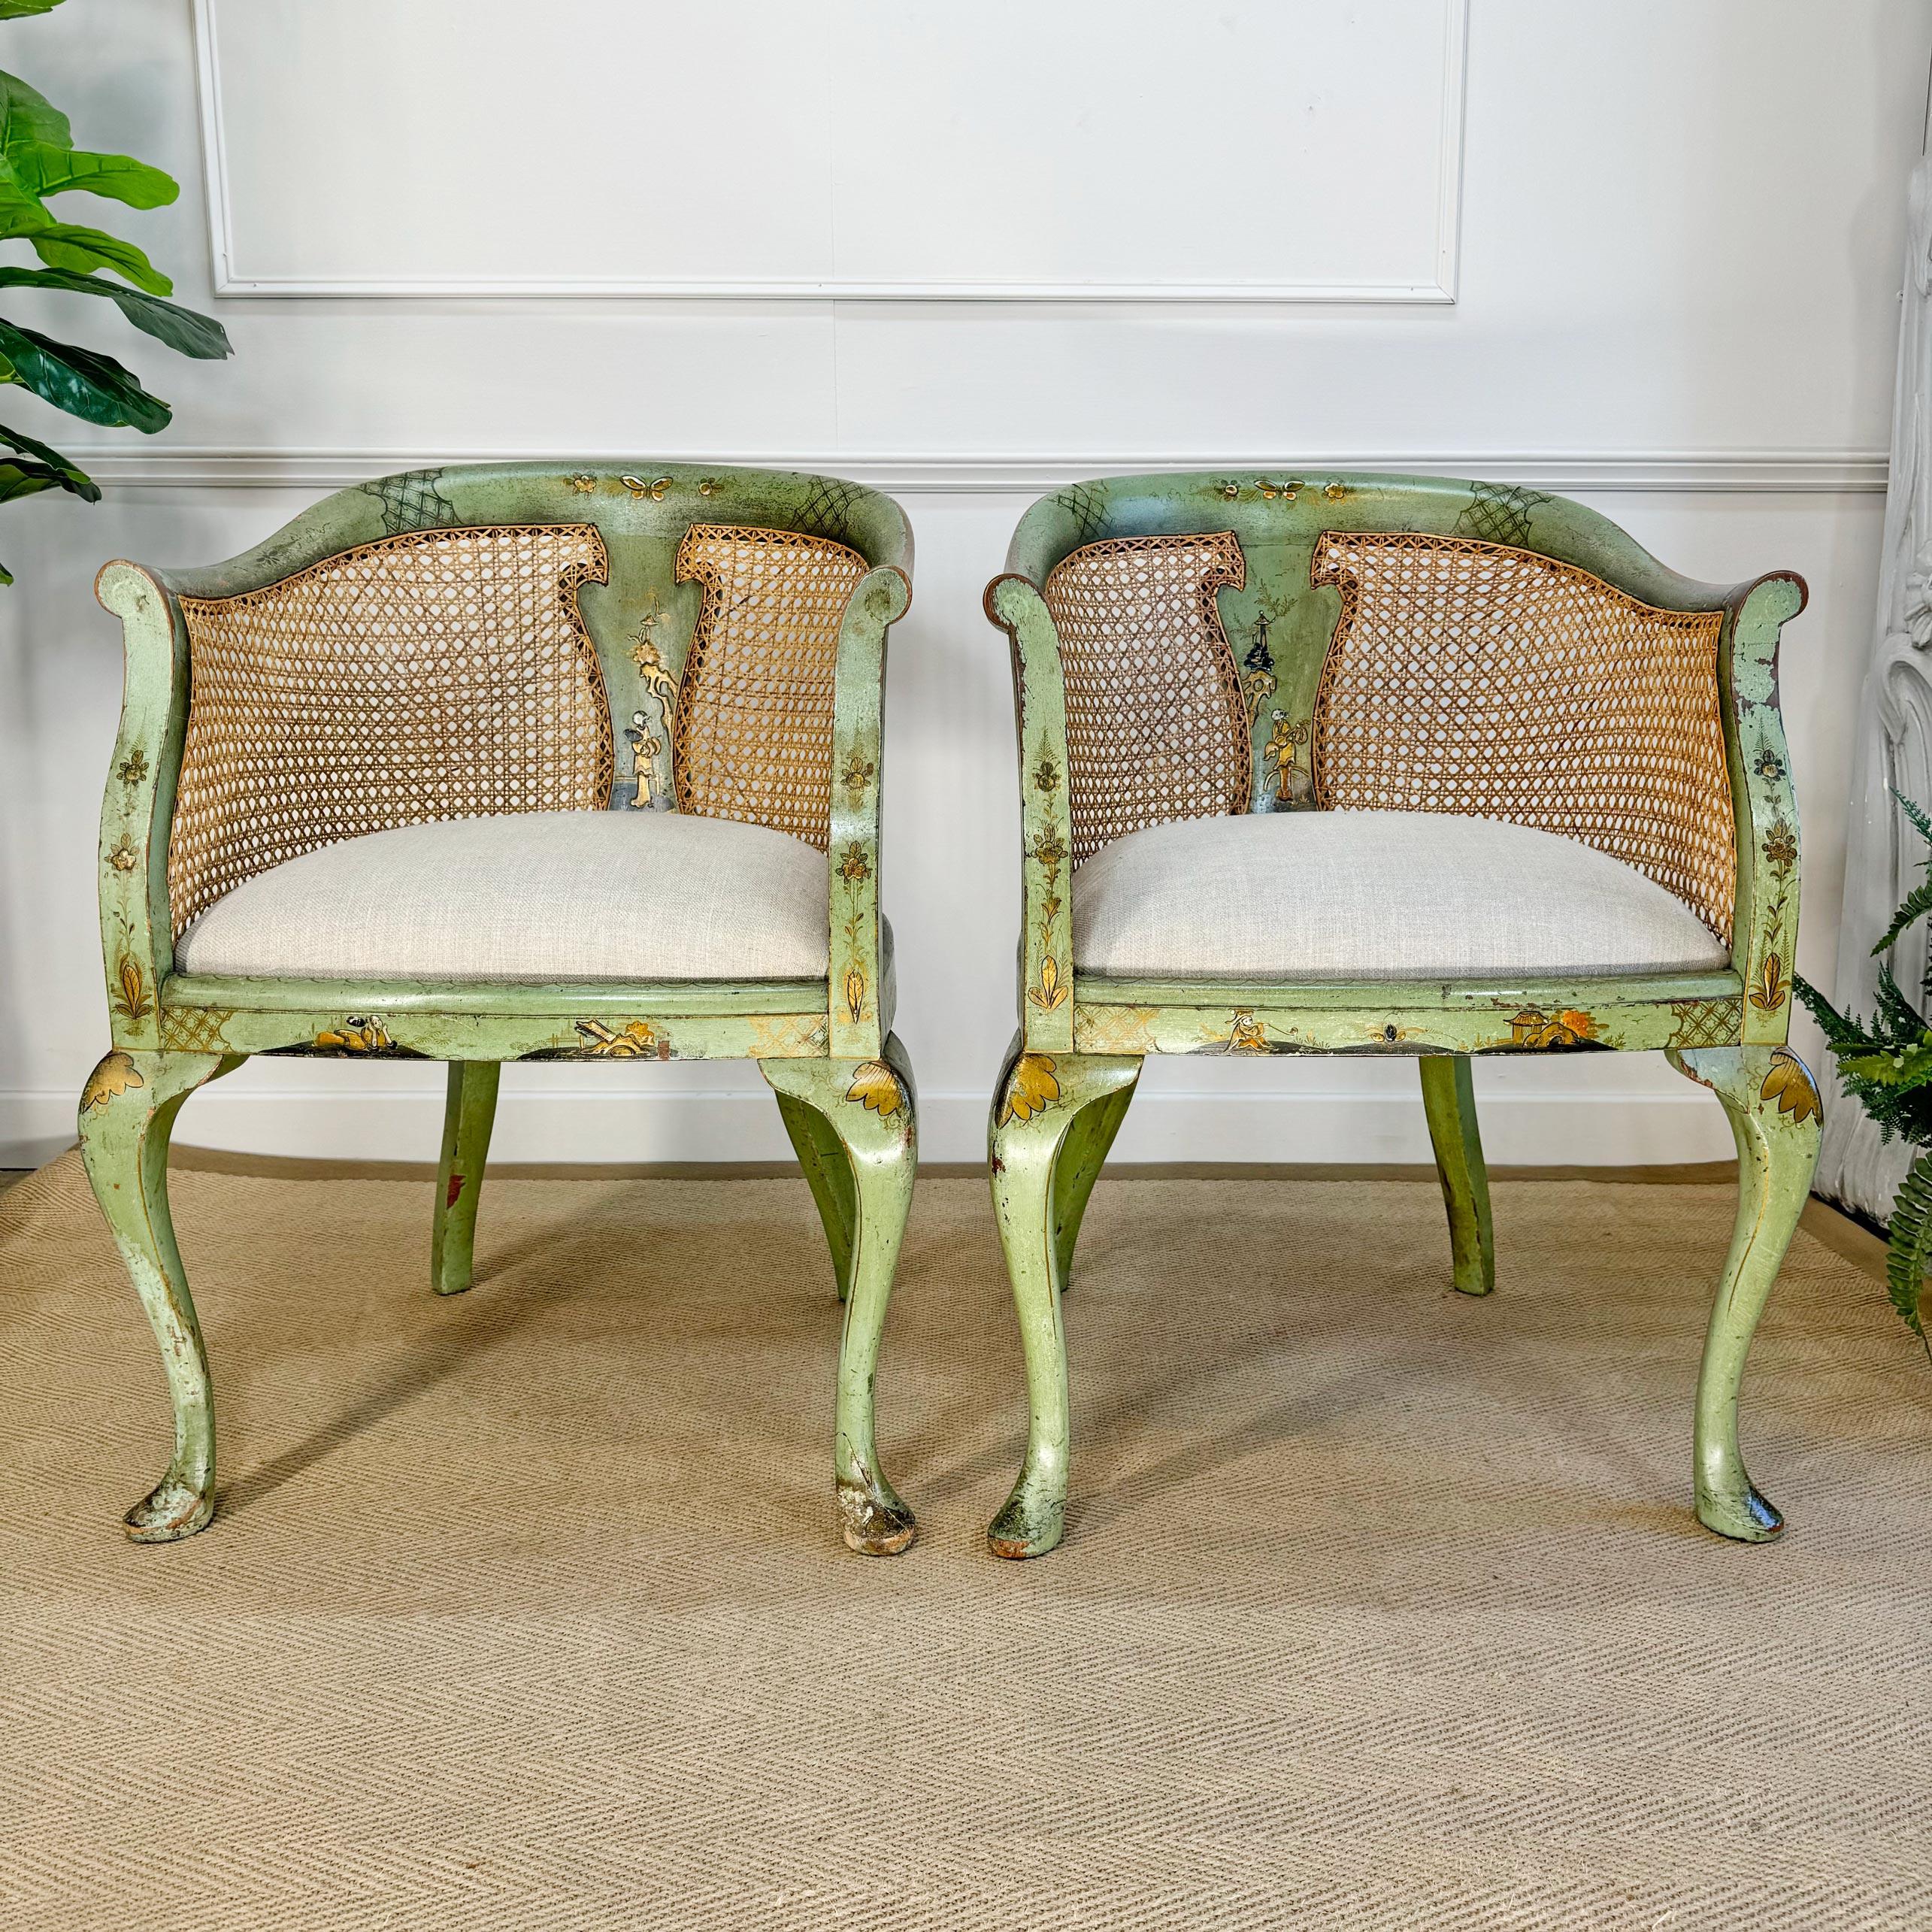 Late 19th Century Pair of 19th Century Green Queen Anne Revival Chinoiserie Bergere Chairs For Sale